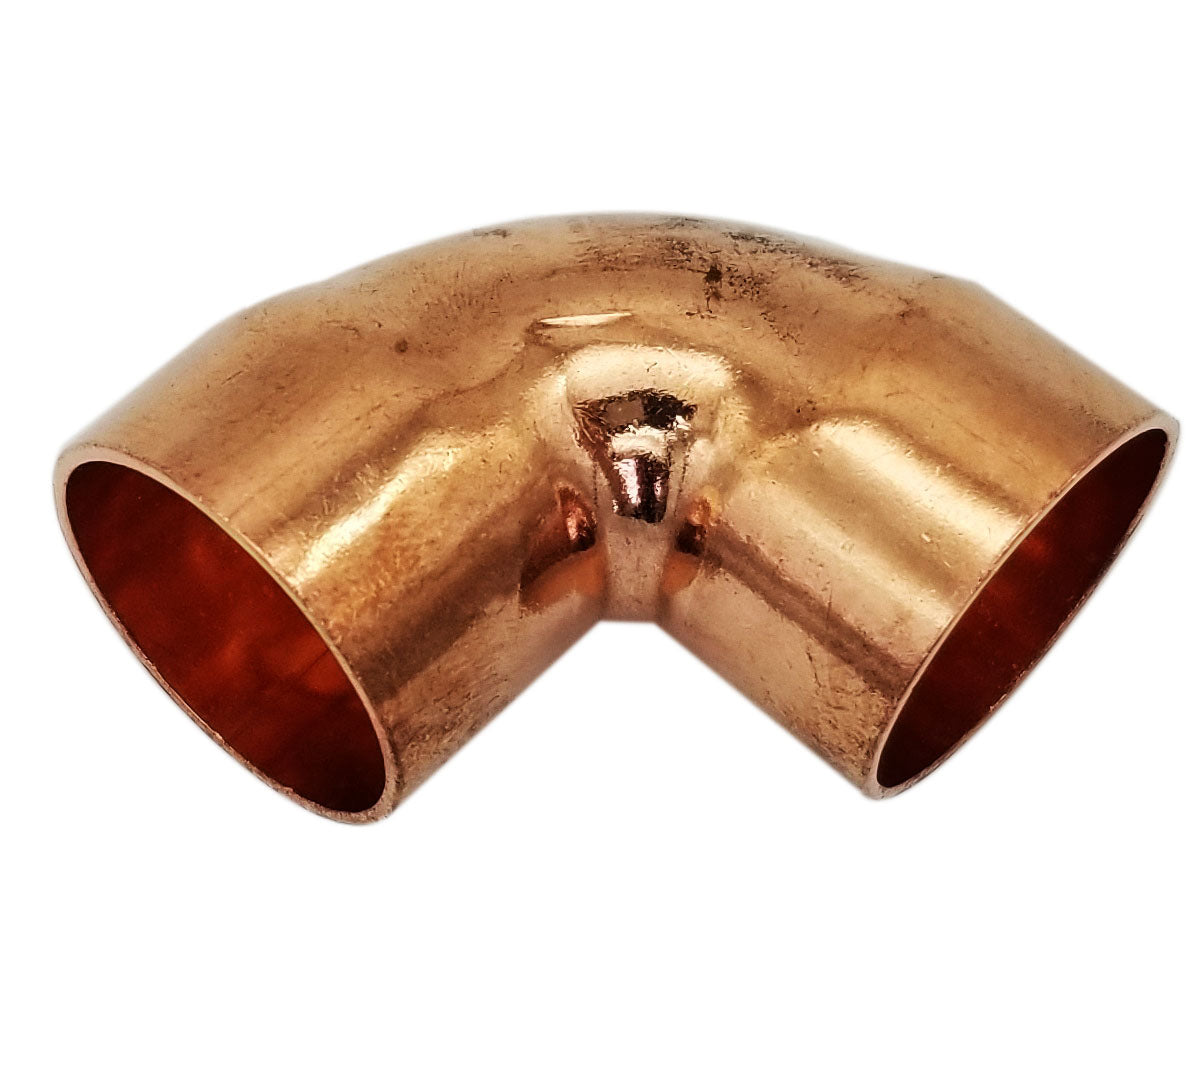 Copper Fitting 1/2 Inch (HVAC Outer Dimension) 3/8 Inch (Plumbing Inner Dimension) - 45 Degree Copper Pressure Elbow & HVAC – 99.9% Pure Copper - 5 Pack